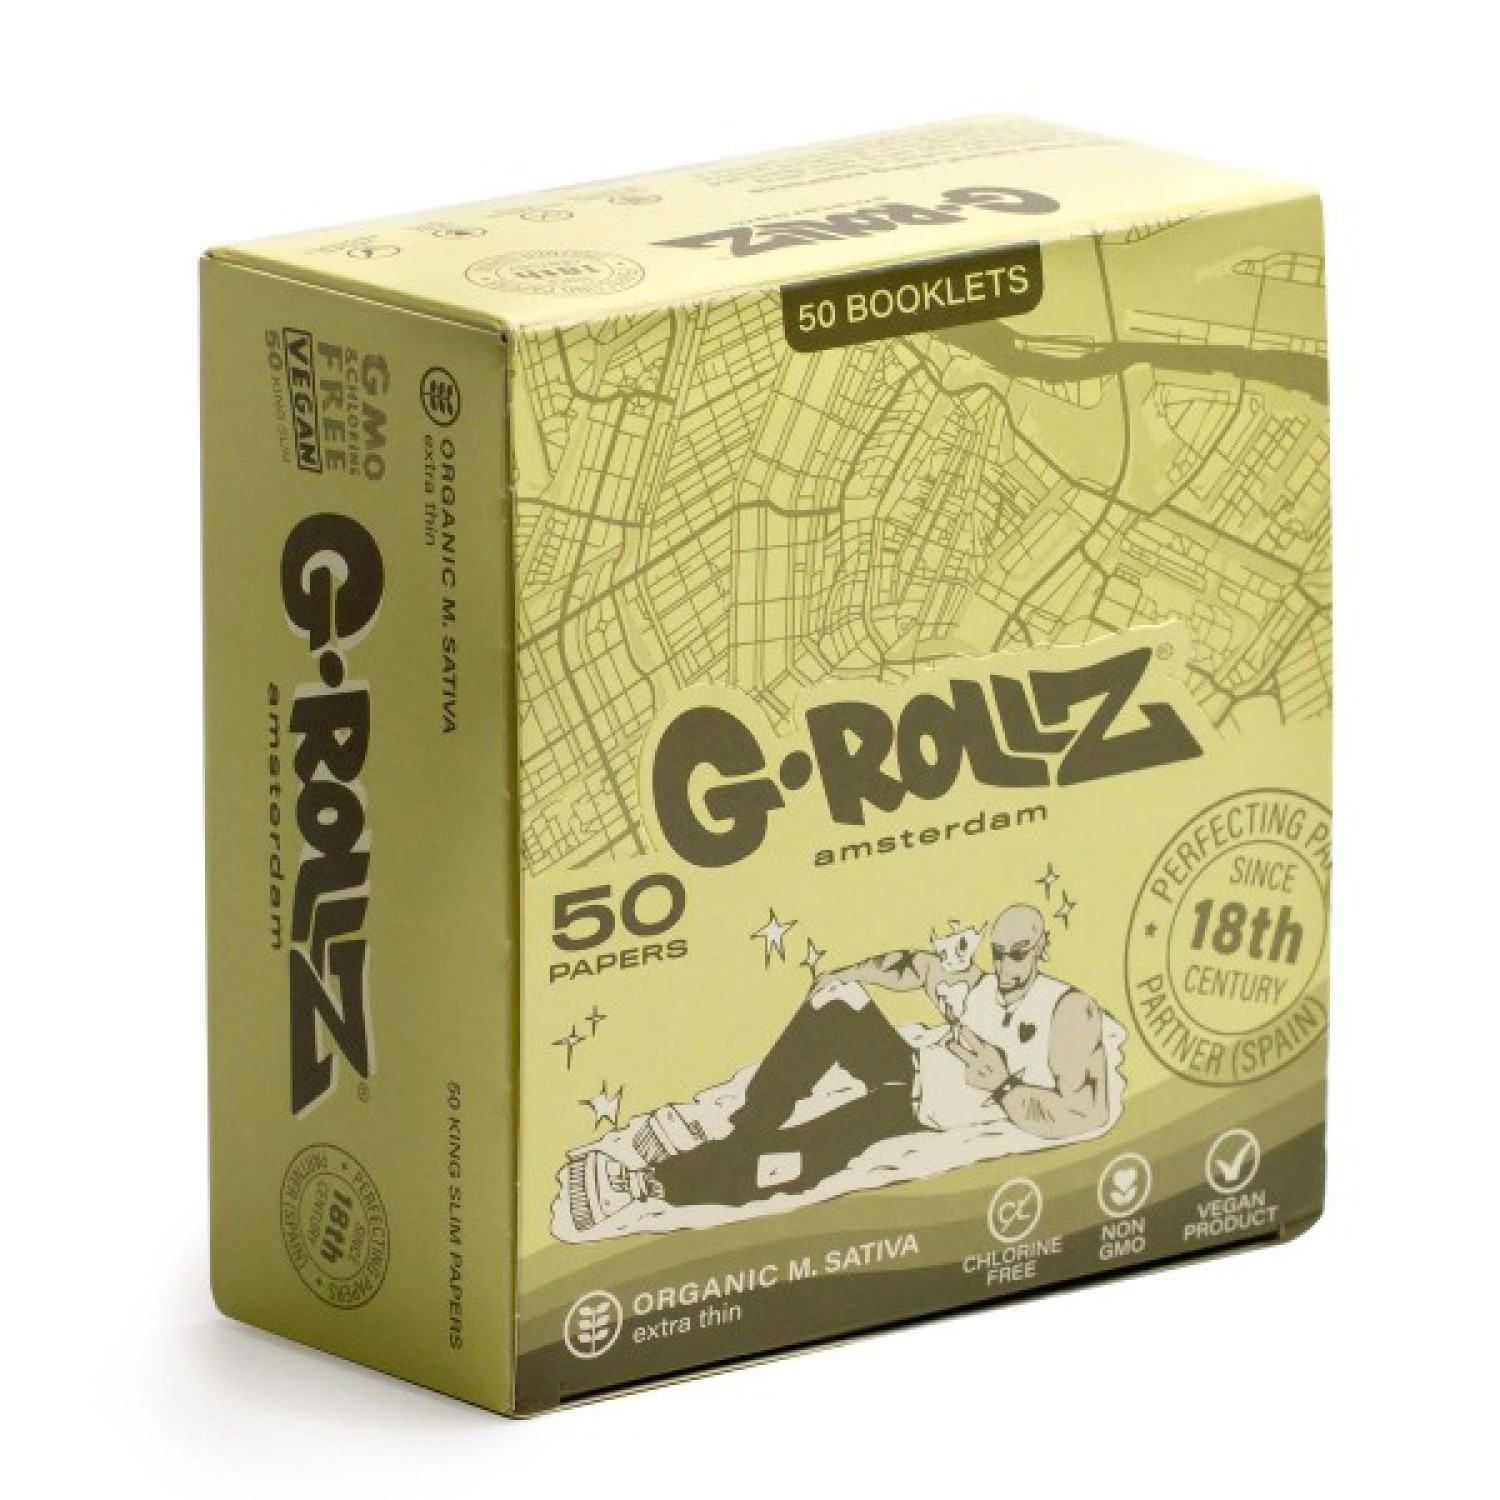 G-ROLLZ,Papers KS "Bamboo Unbleached " VE-50